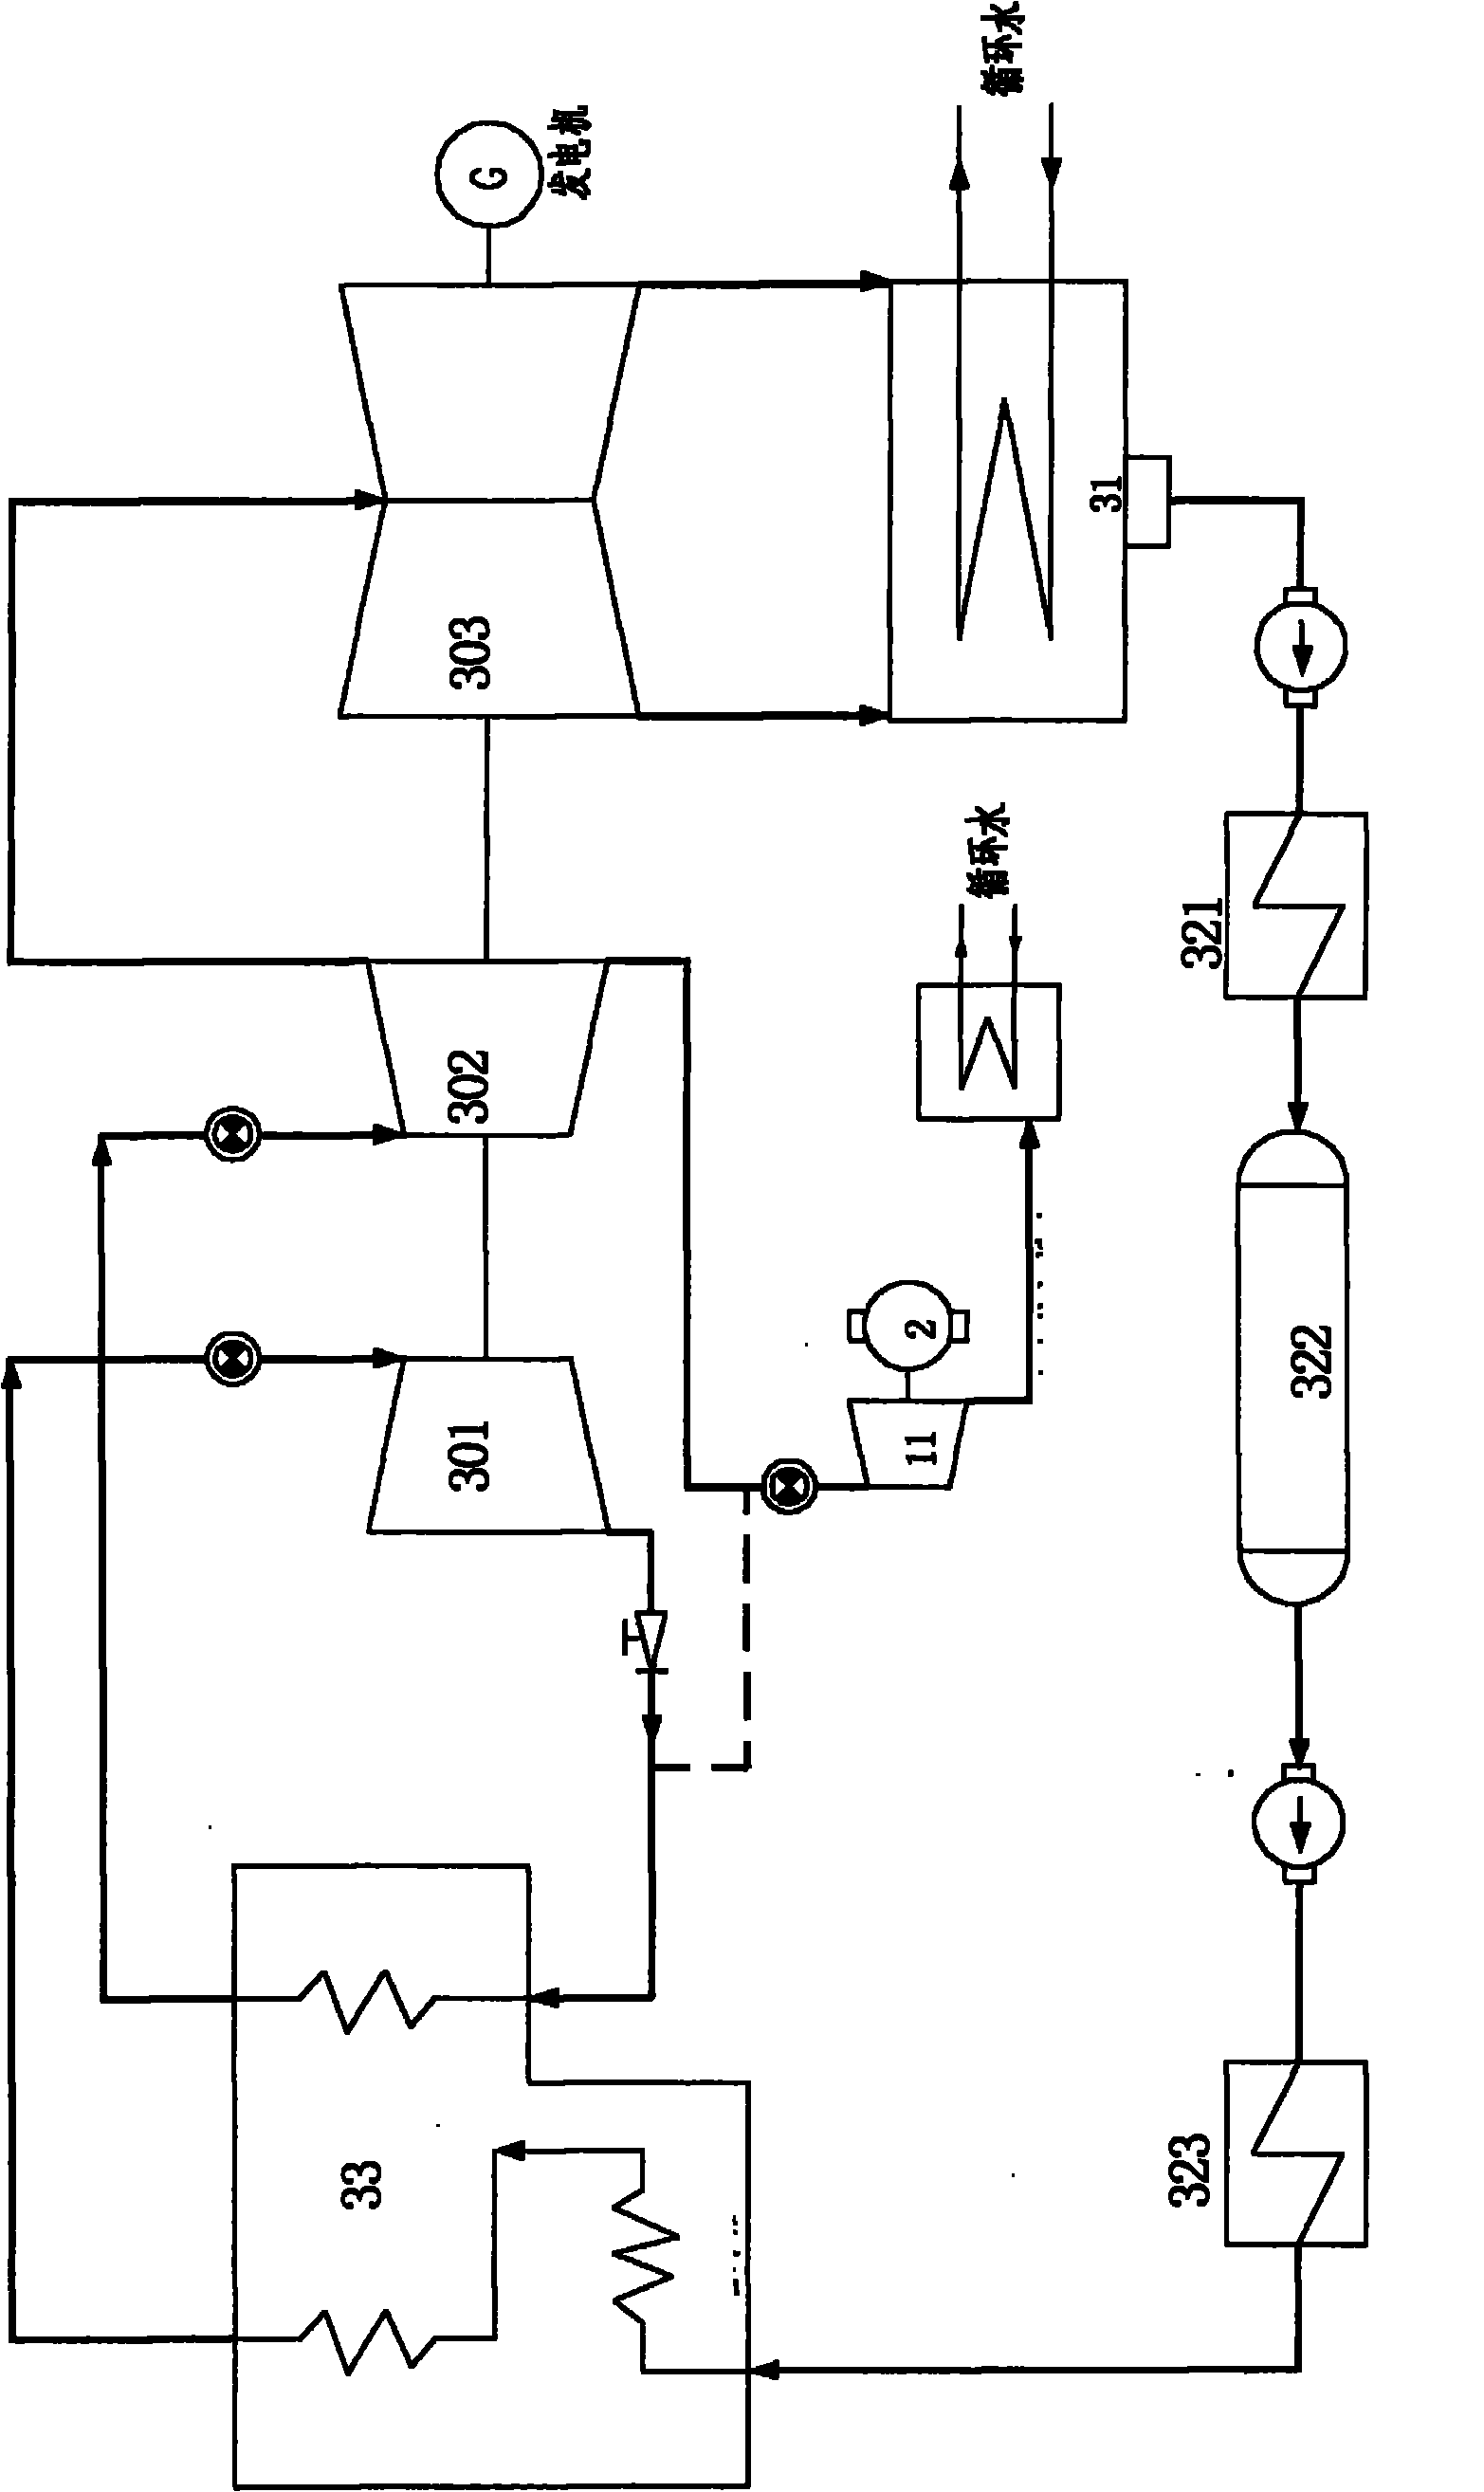 Small turbine system in power plant and thermal cycle system in power plant containing same